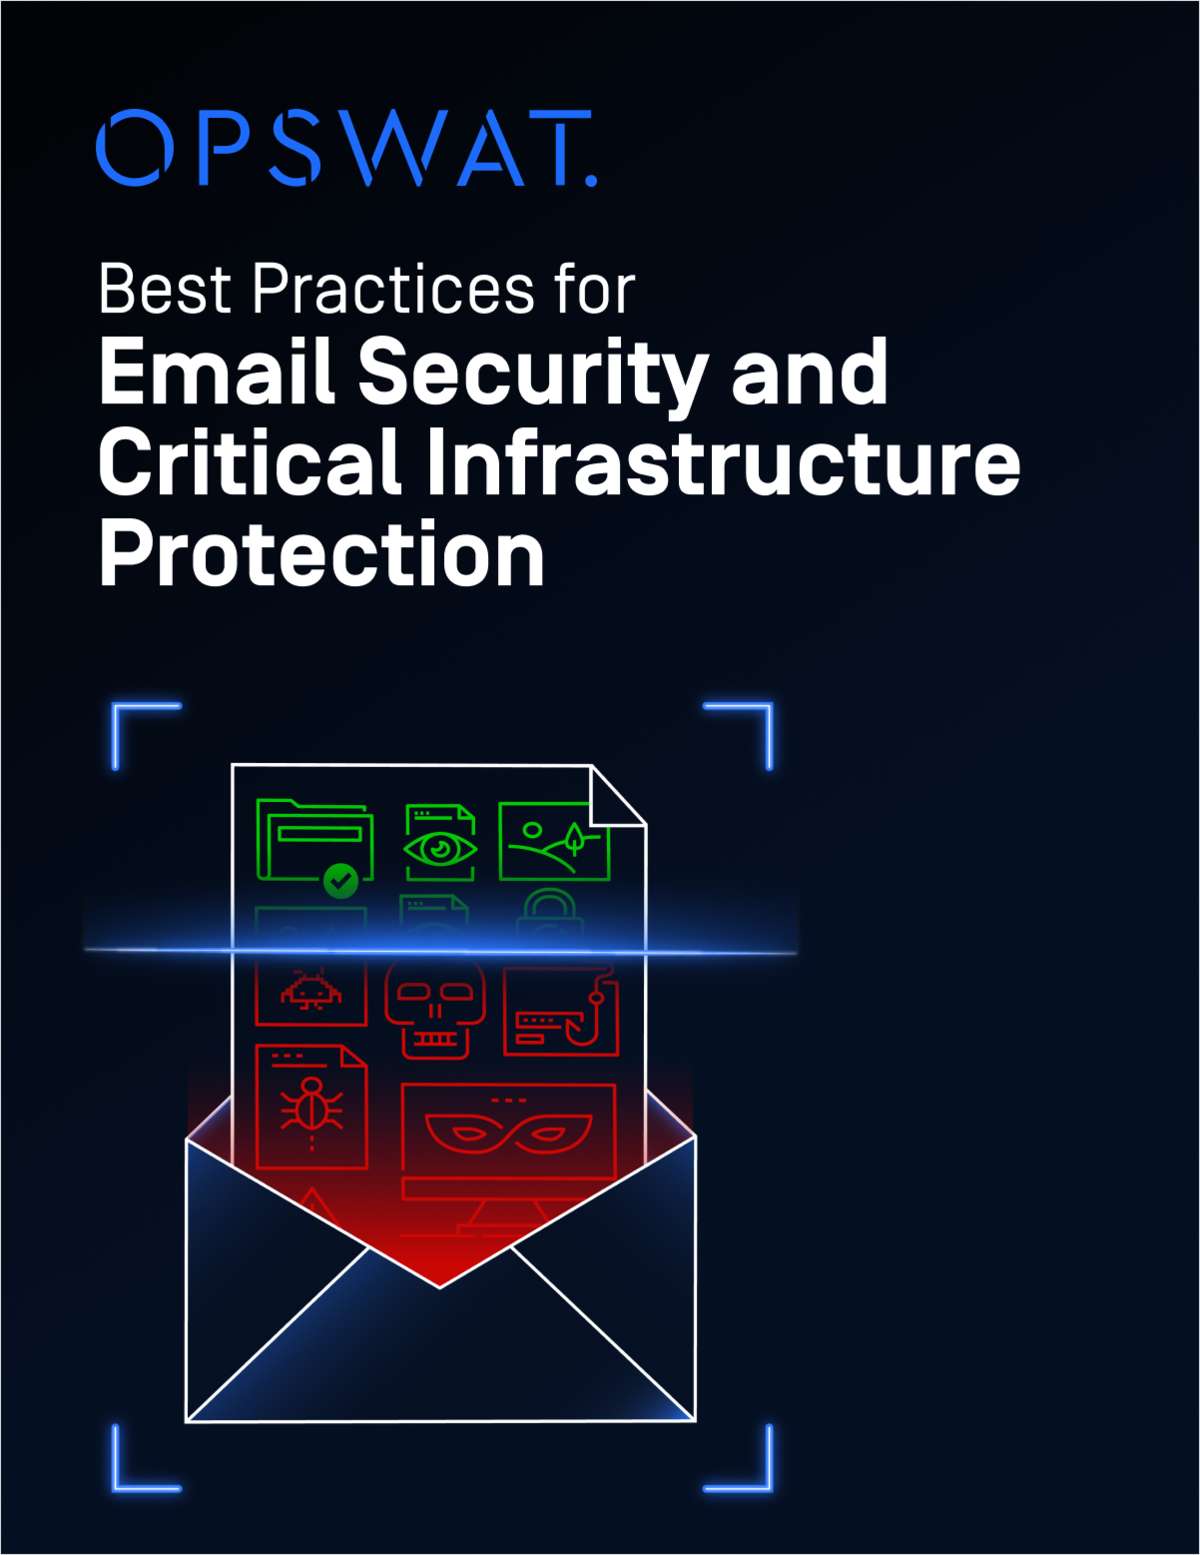 Best Practices for Email Security and Critical Infrastructure Protection